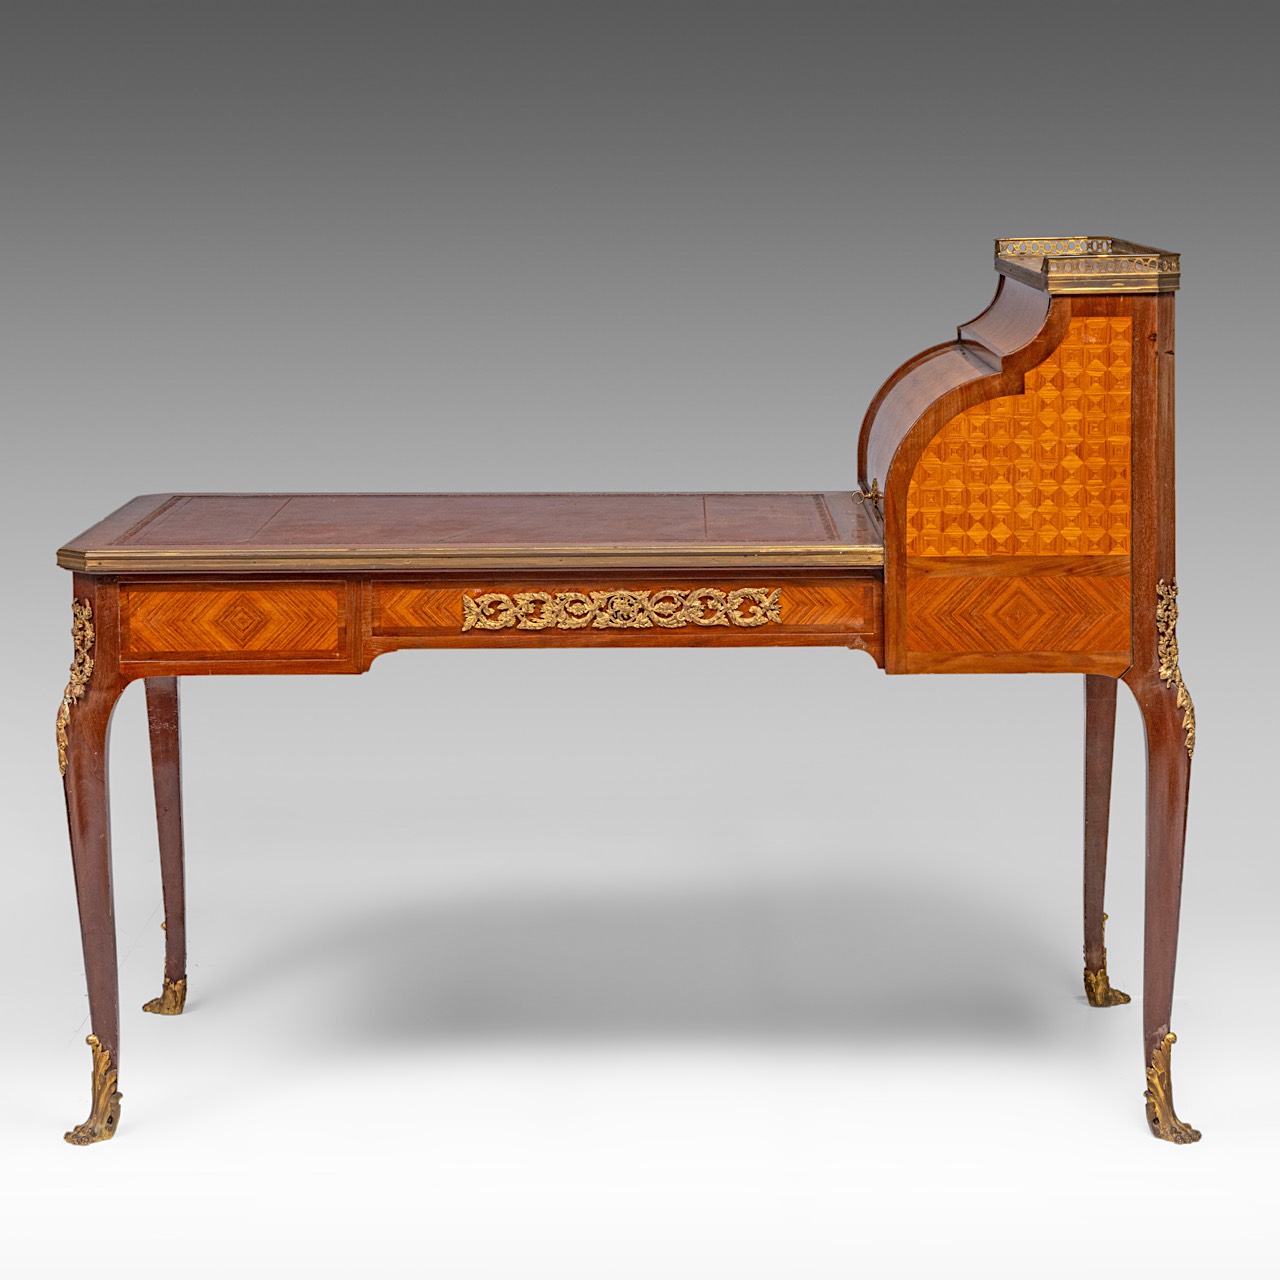 A leather-topped Transitional-style bureau plat and rolltop desk with parquetry and gilt bronze moun - Image 5 of 9